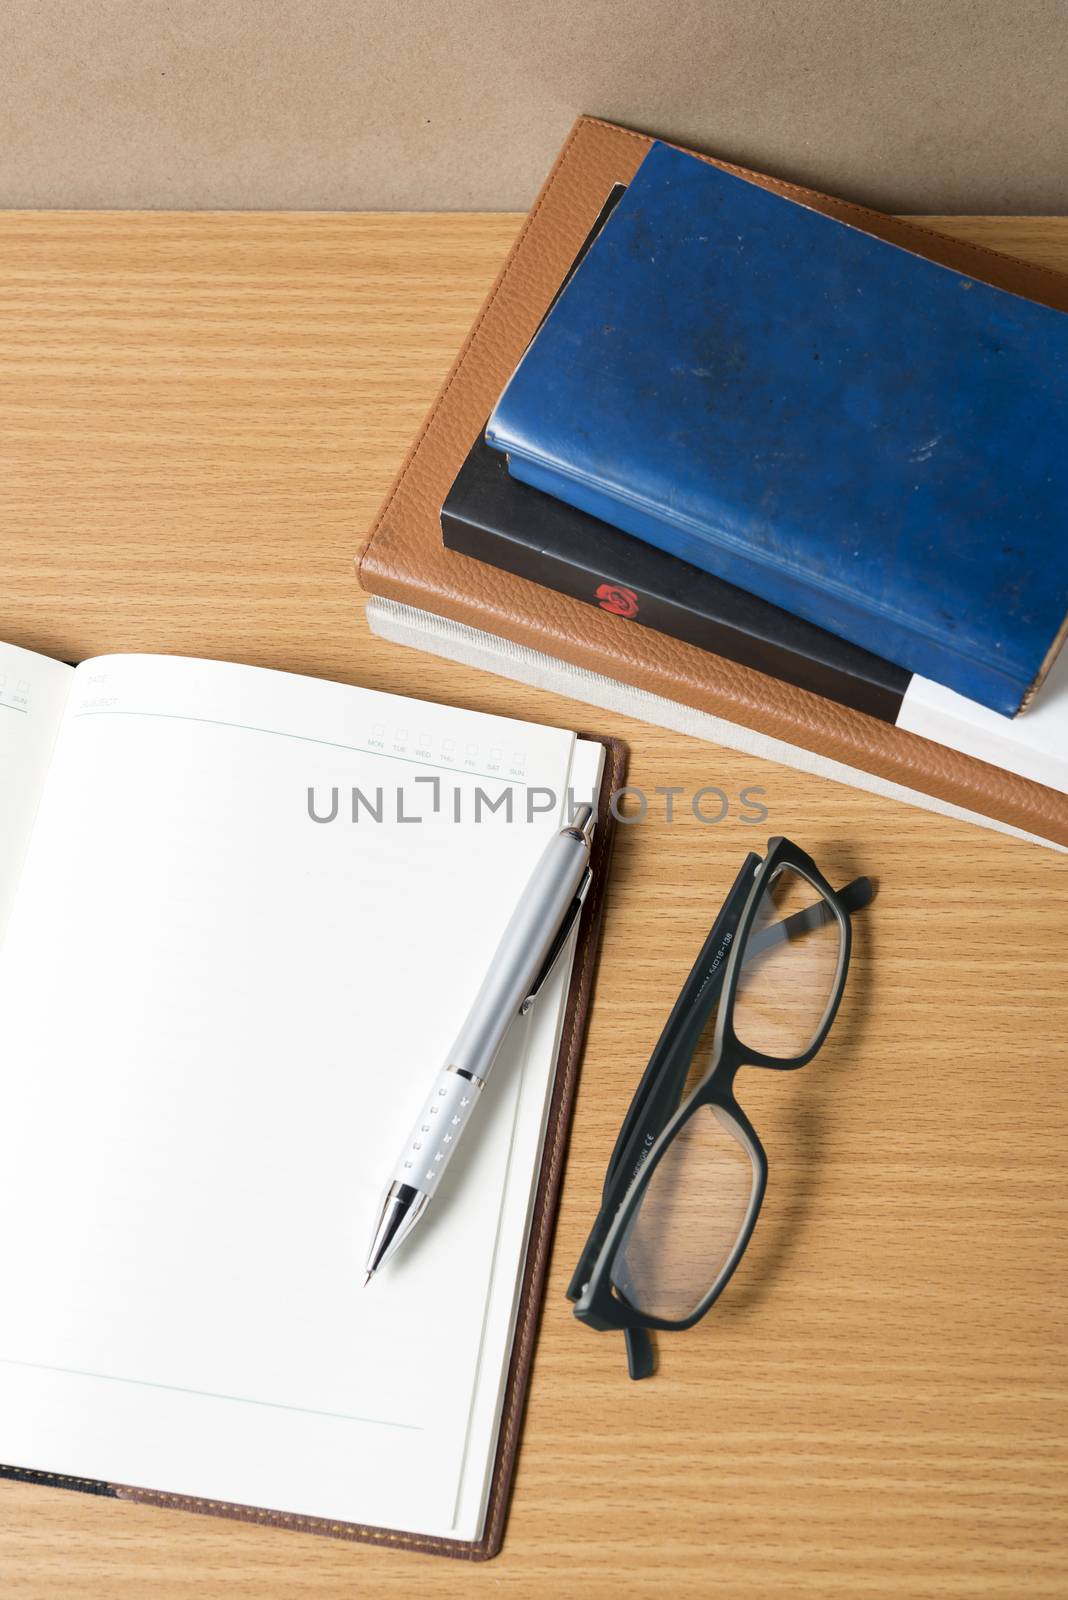 open notebook with stack of book on wood background